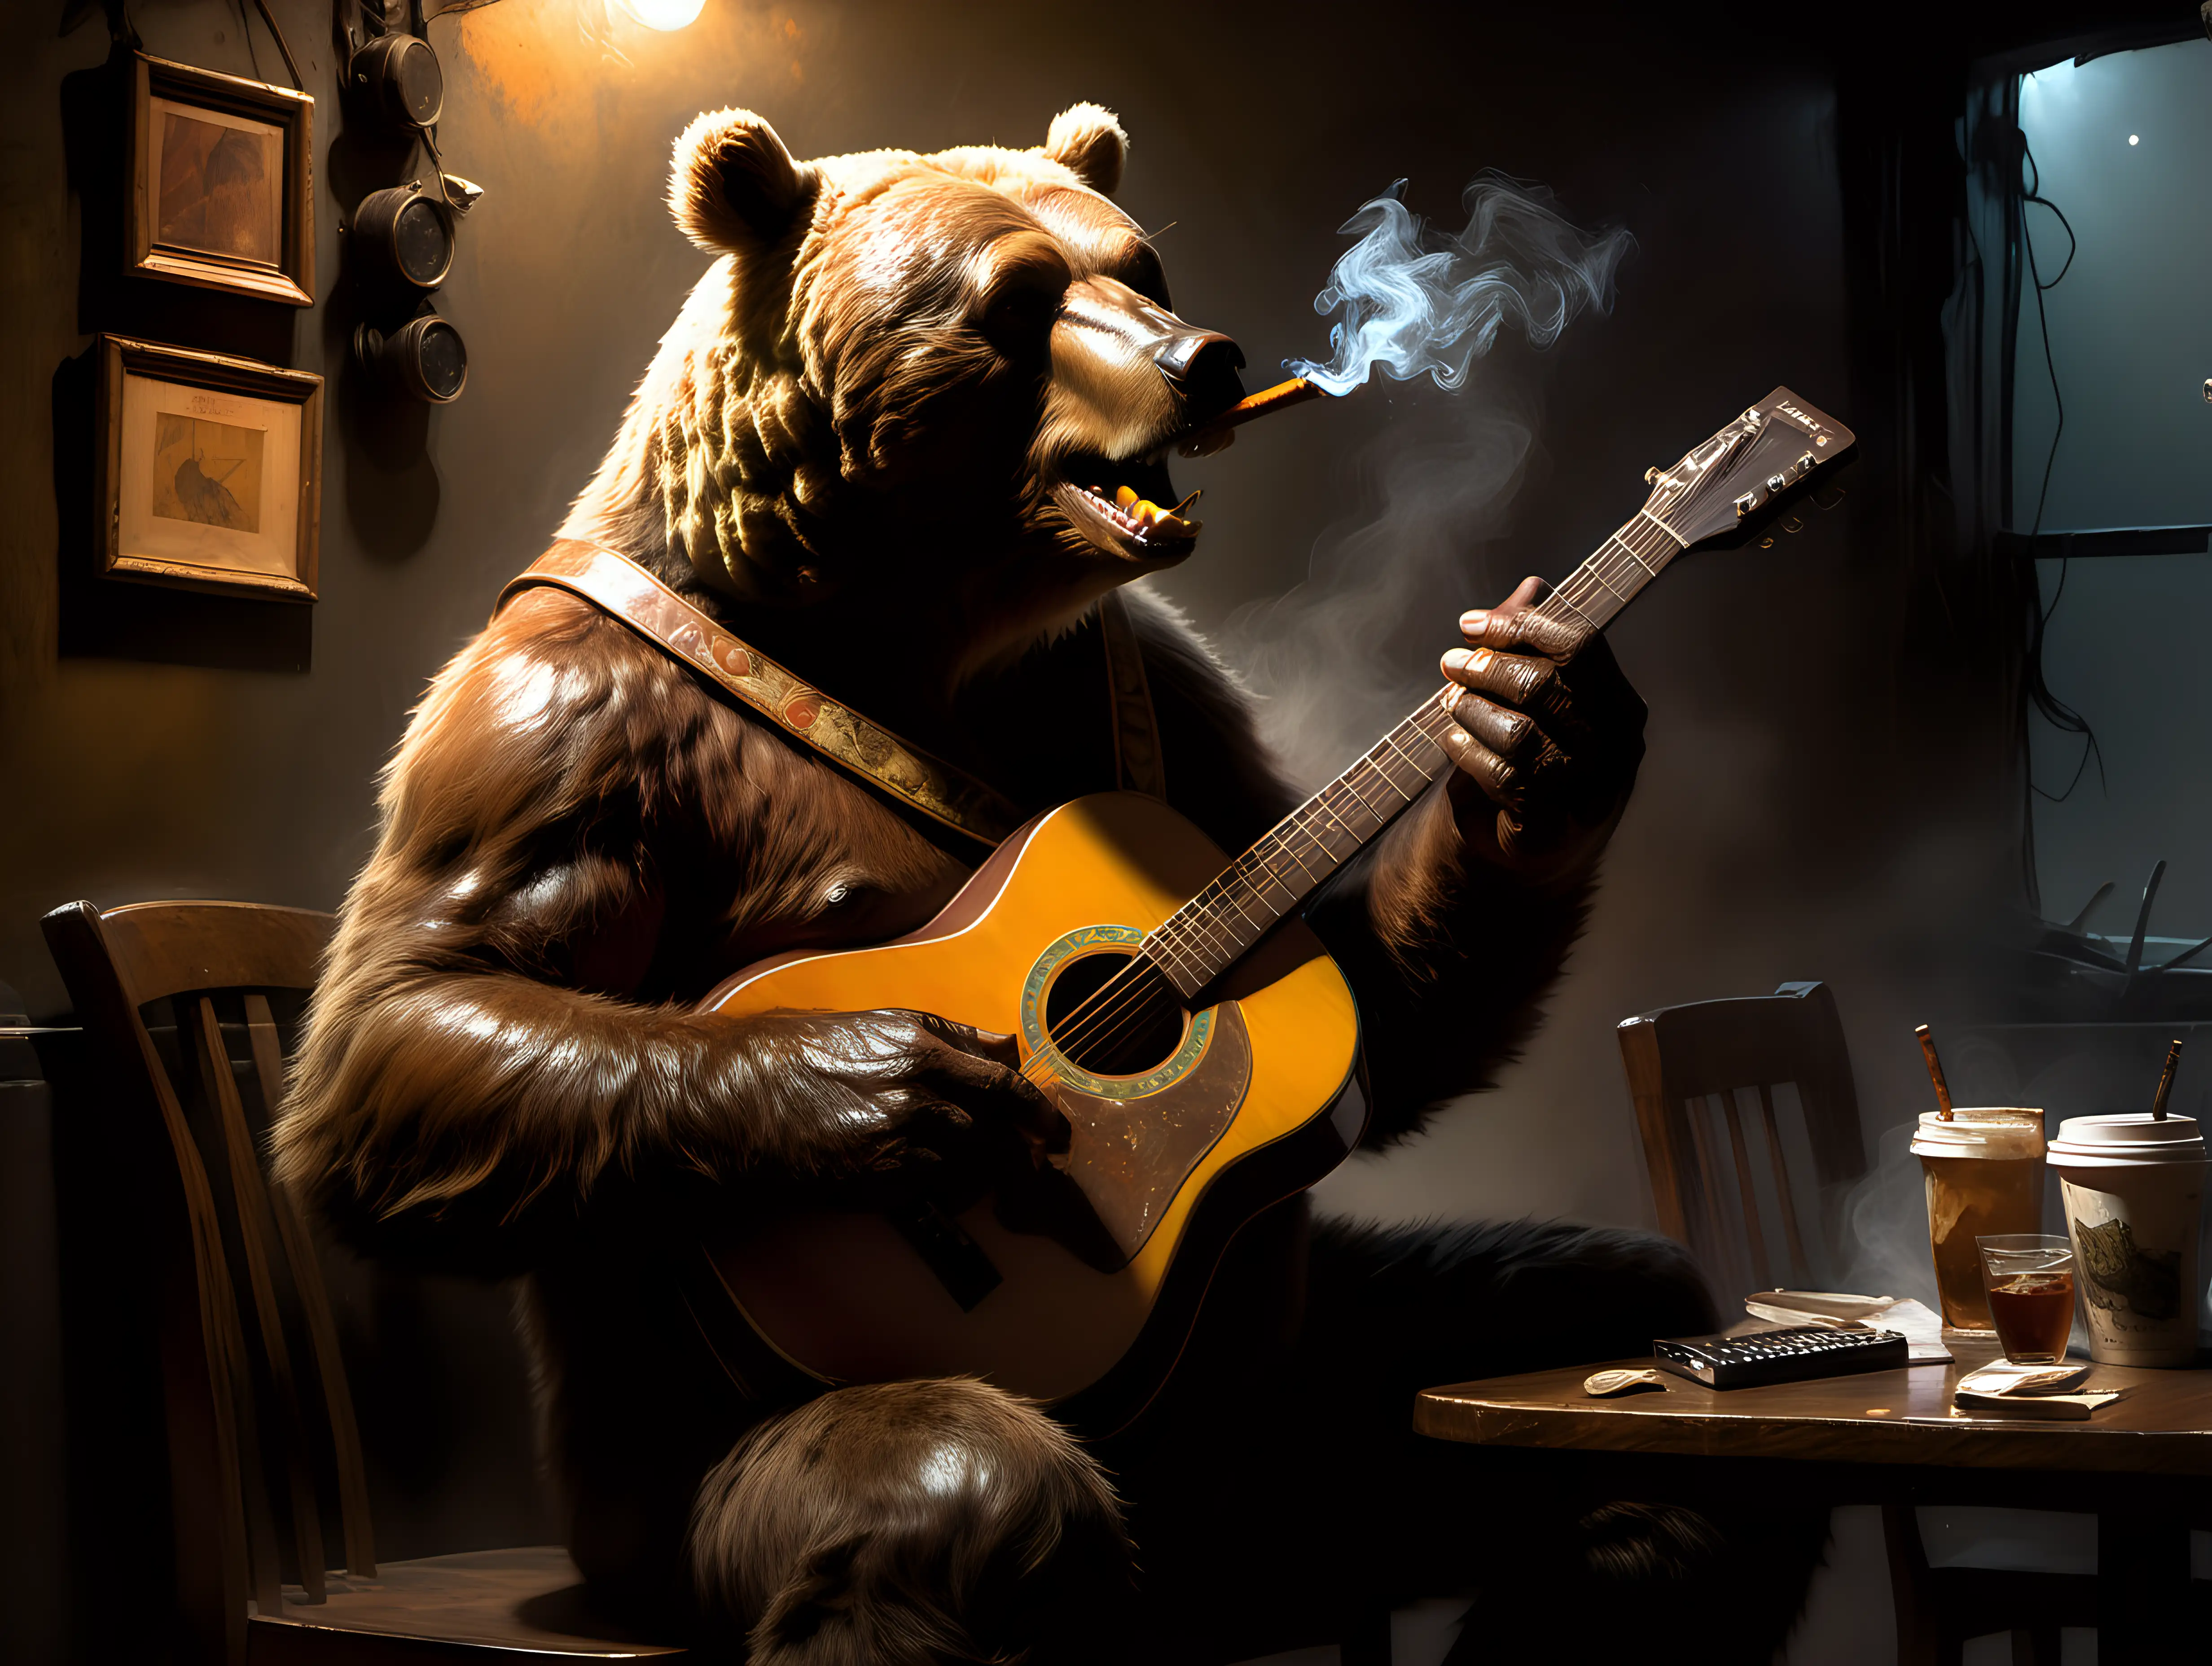 brown bear playing guitar and harmonica in a dark cafe Frank Frazetta style